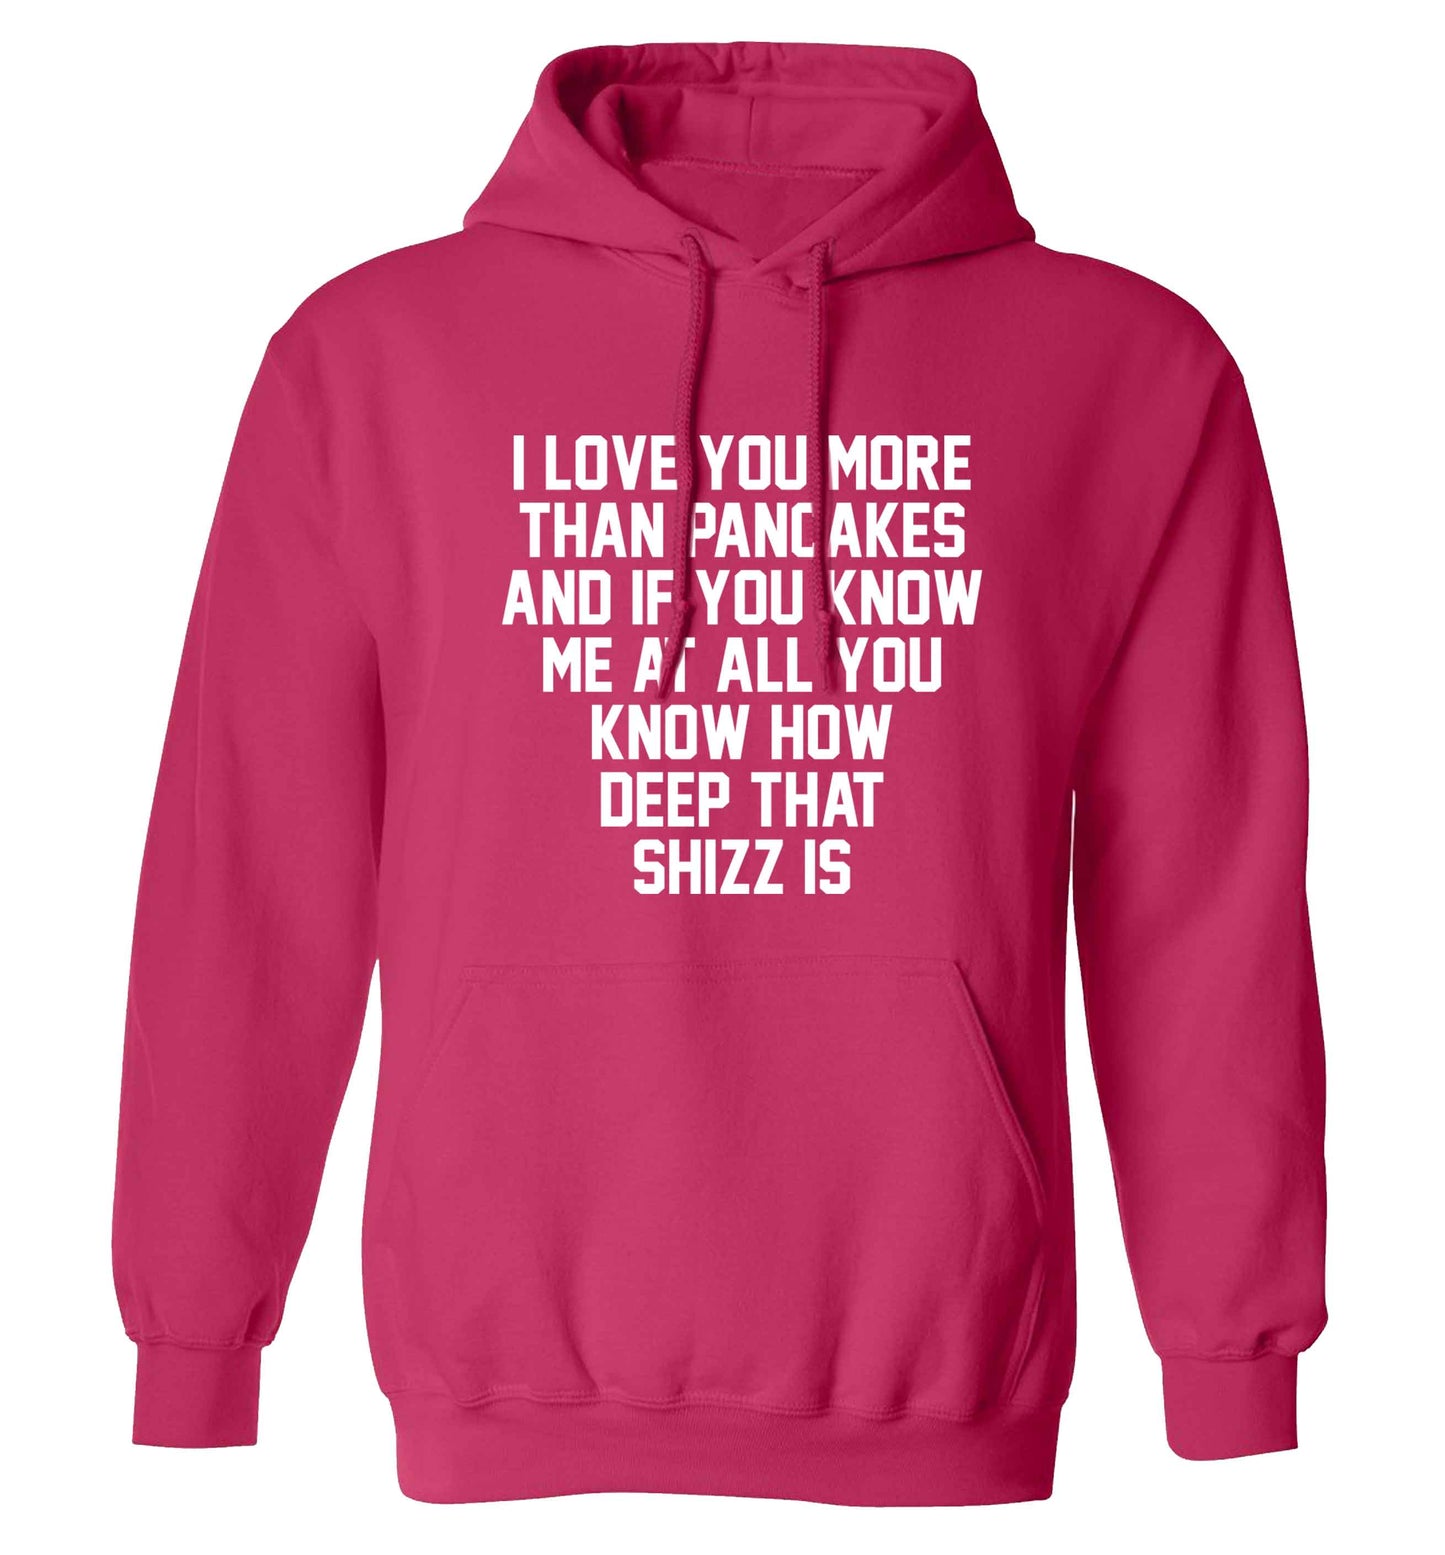 I love you more than pancakes and if you know me at all you know how deep that shizz is adults unisex pink hoodie 2XL